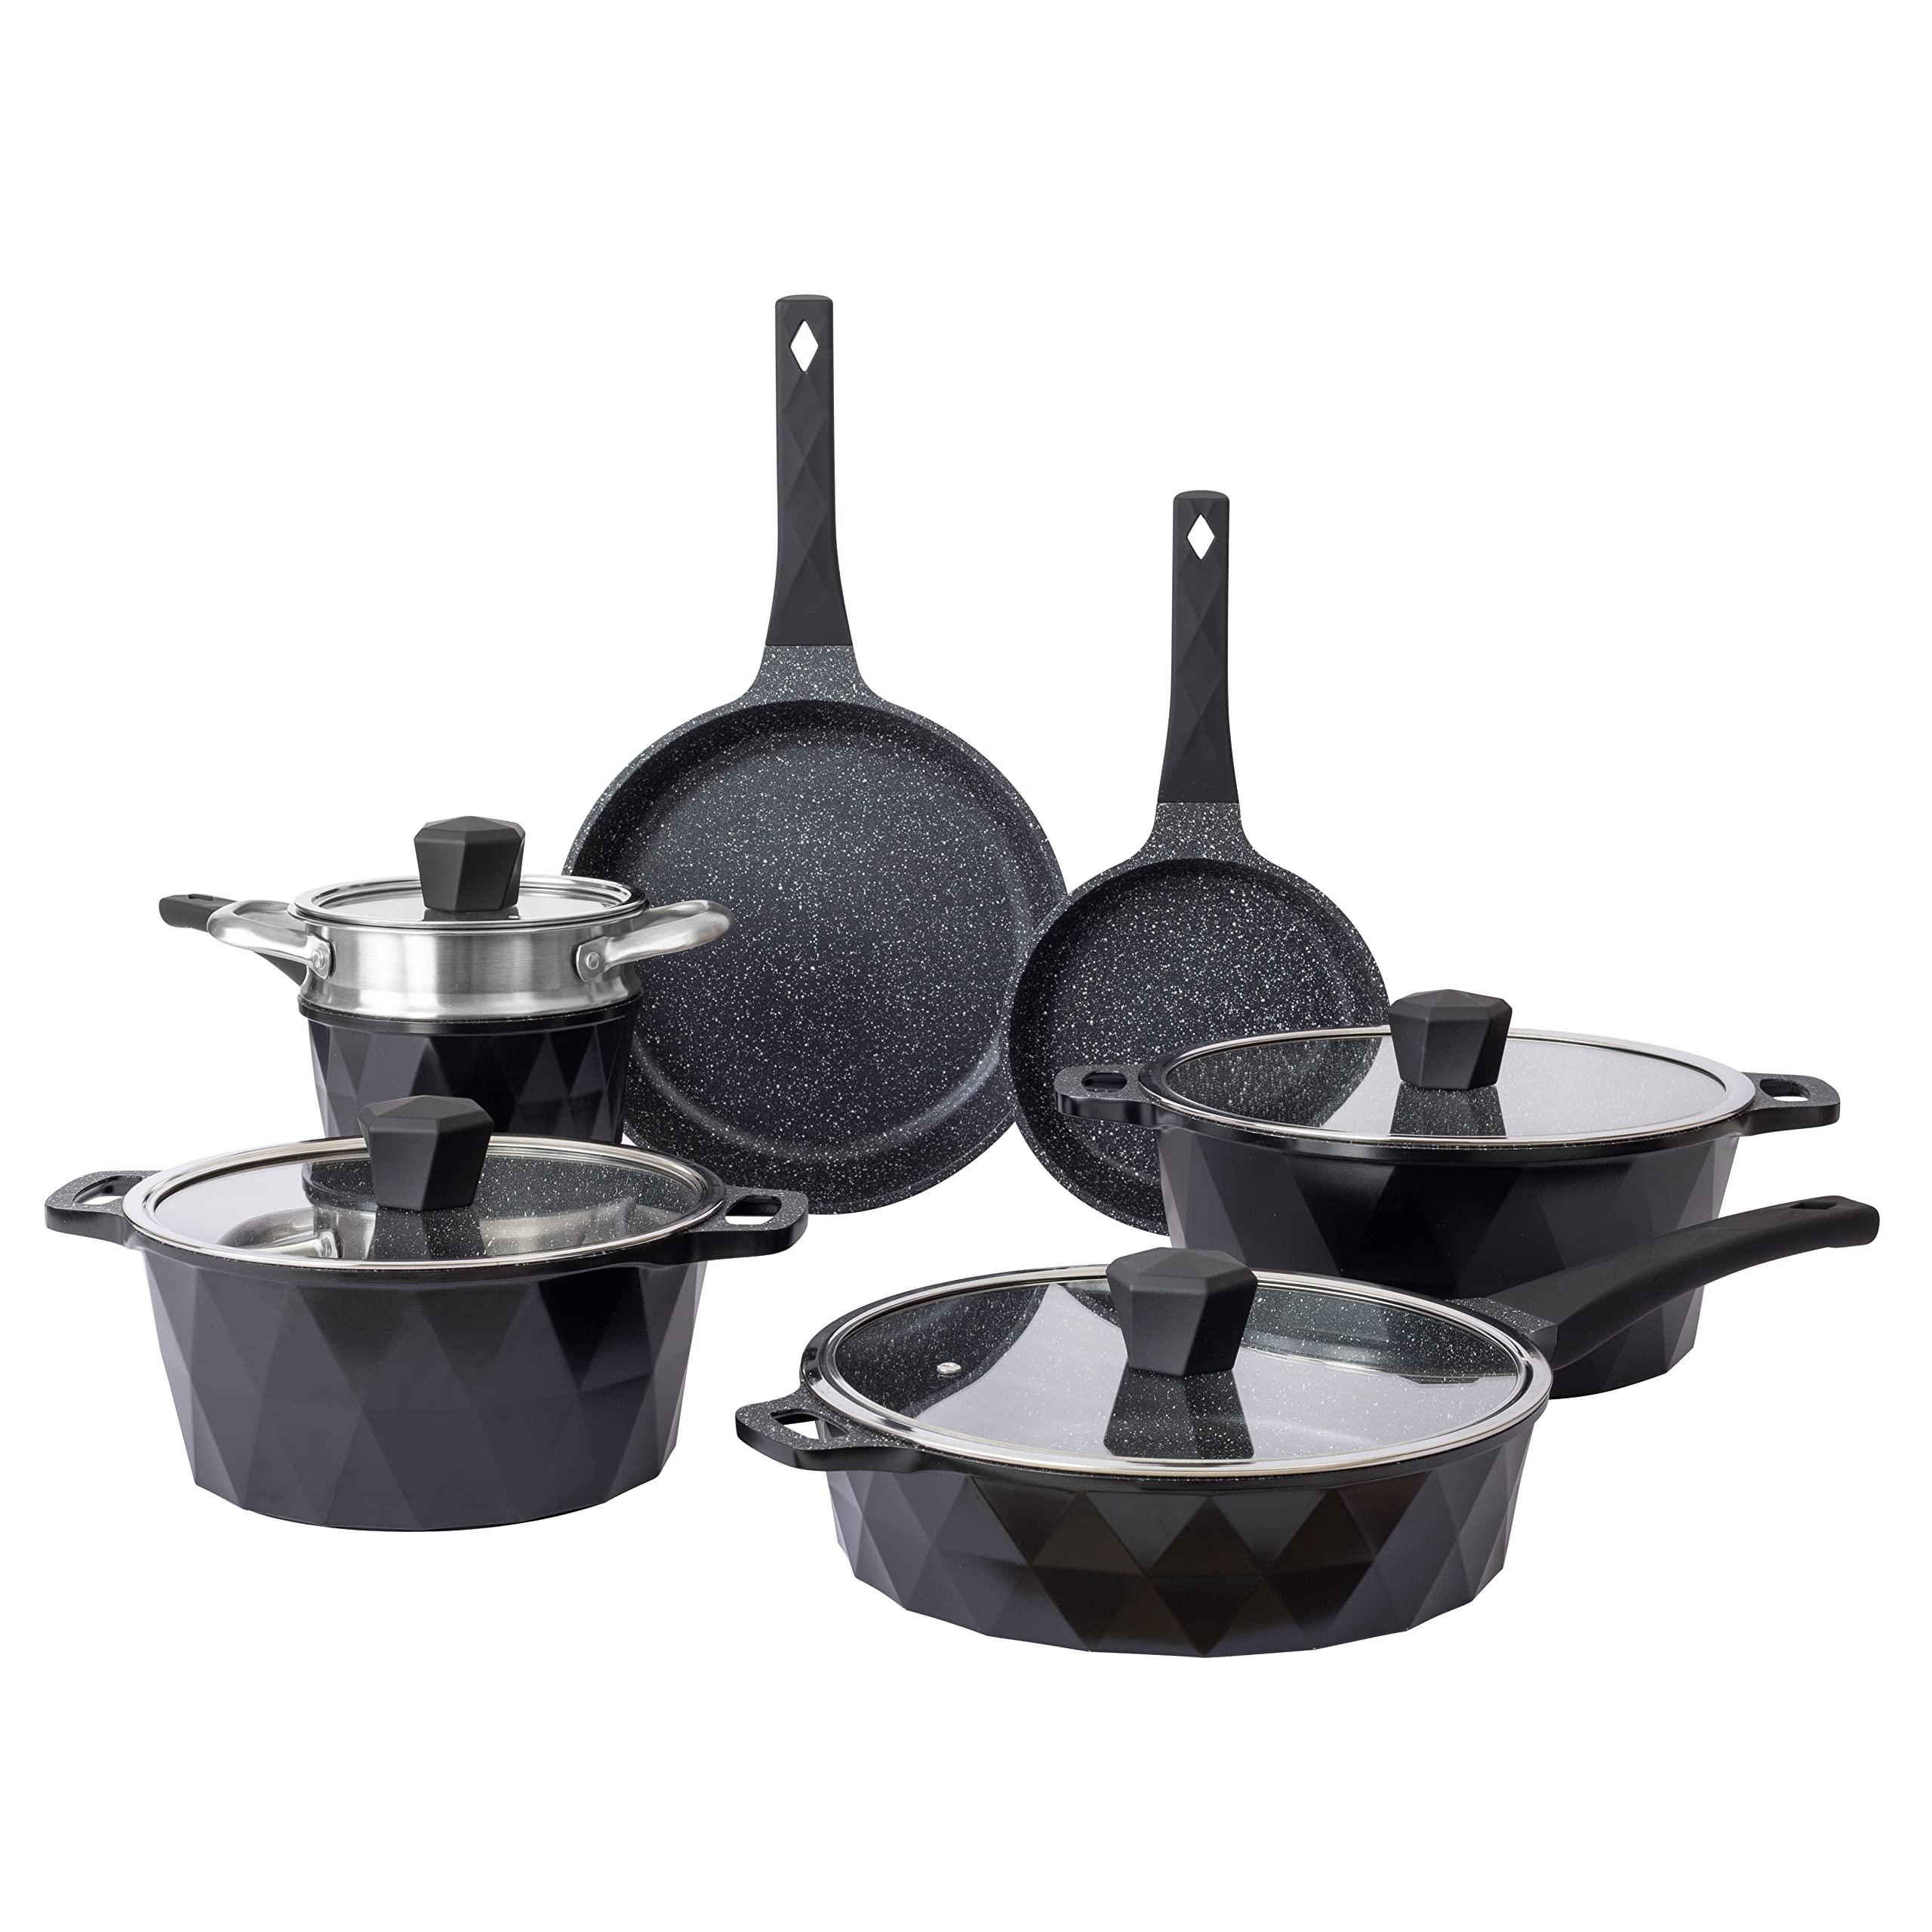 Country Kitchen country kitchen nonstick induction cookware sets - 11 piece  nonstick cast aluminum pots and pans with bakelite handles - indu